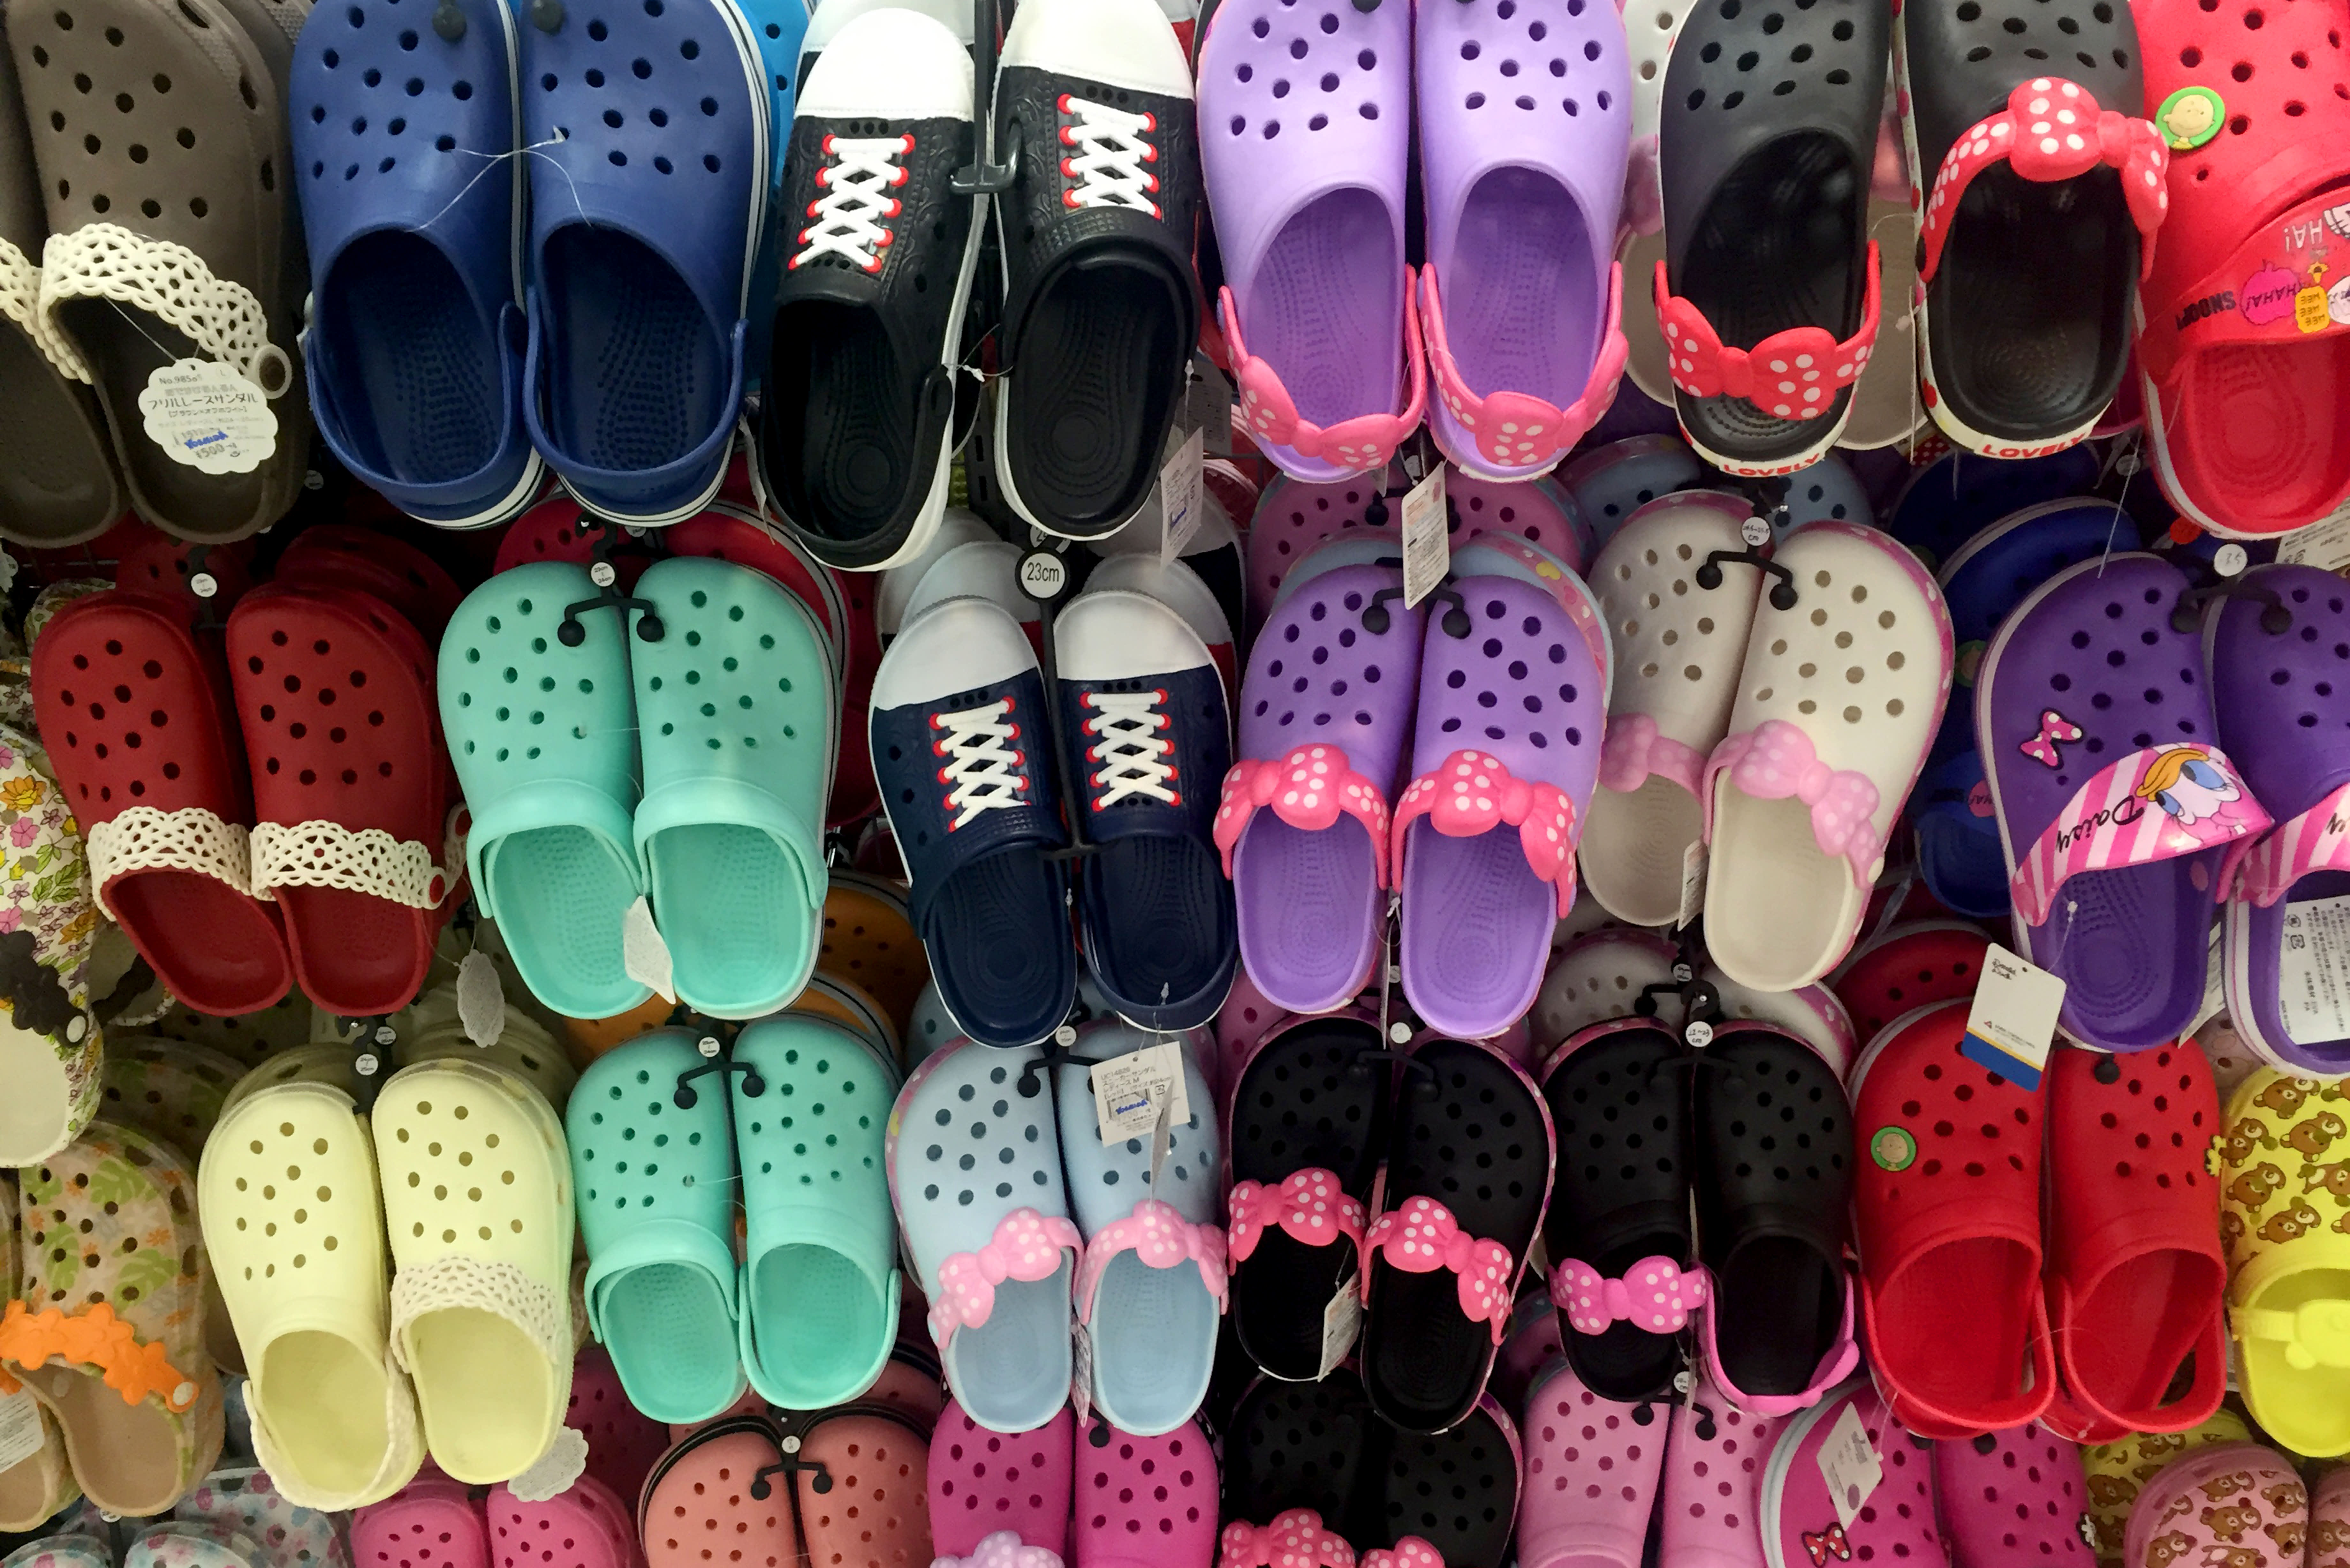 Crocs CEO Andrew Rees optimistic the shoe brand can grow post-pandemic